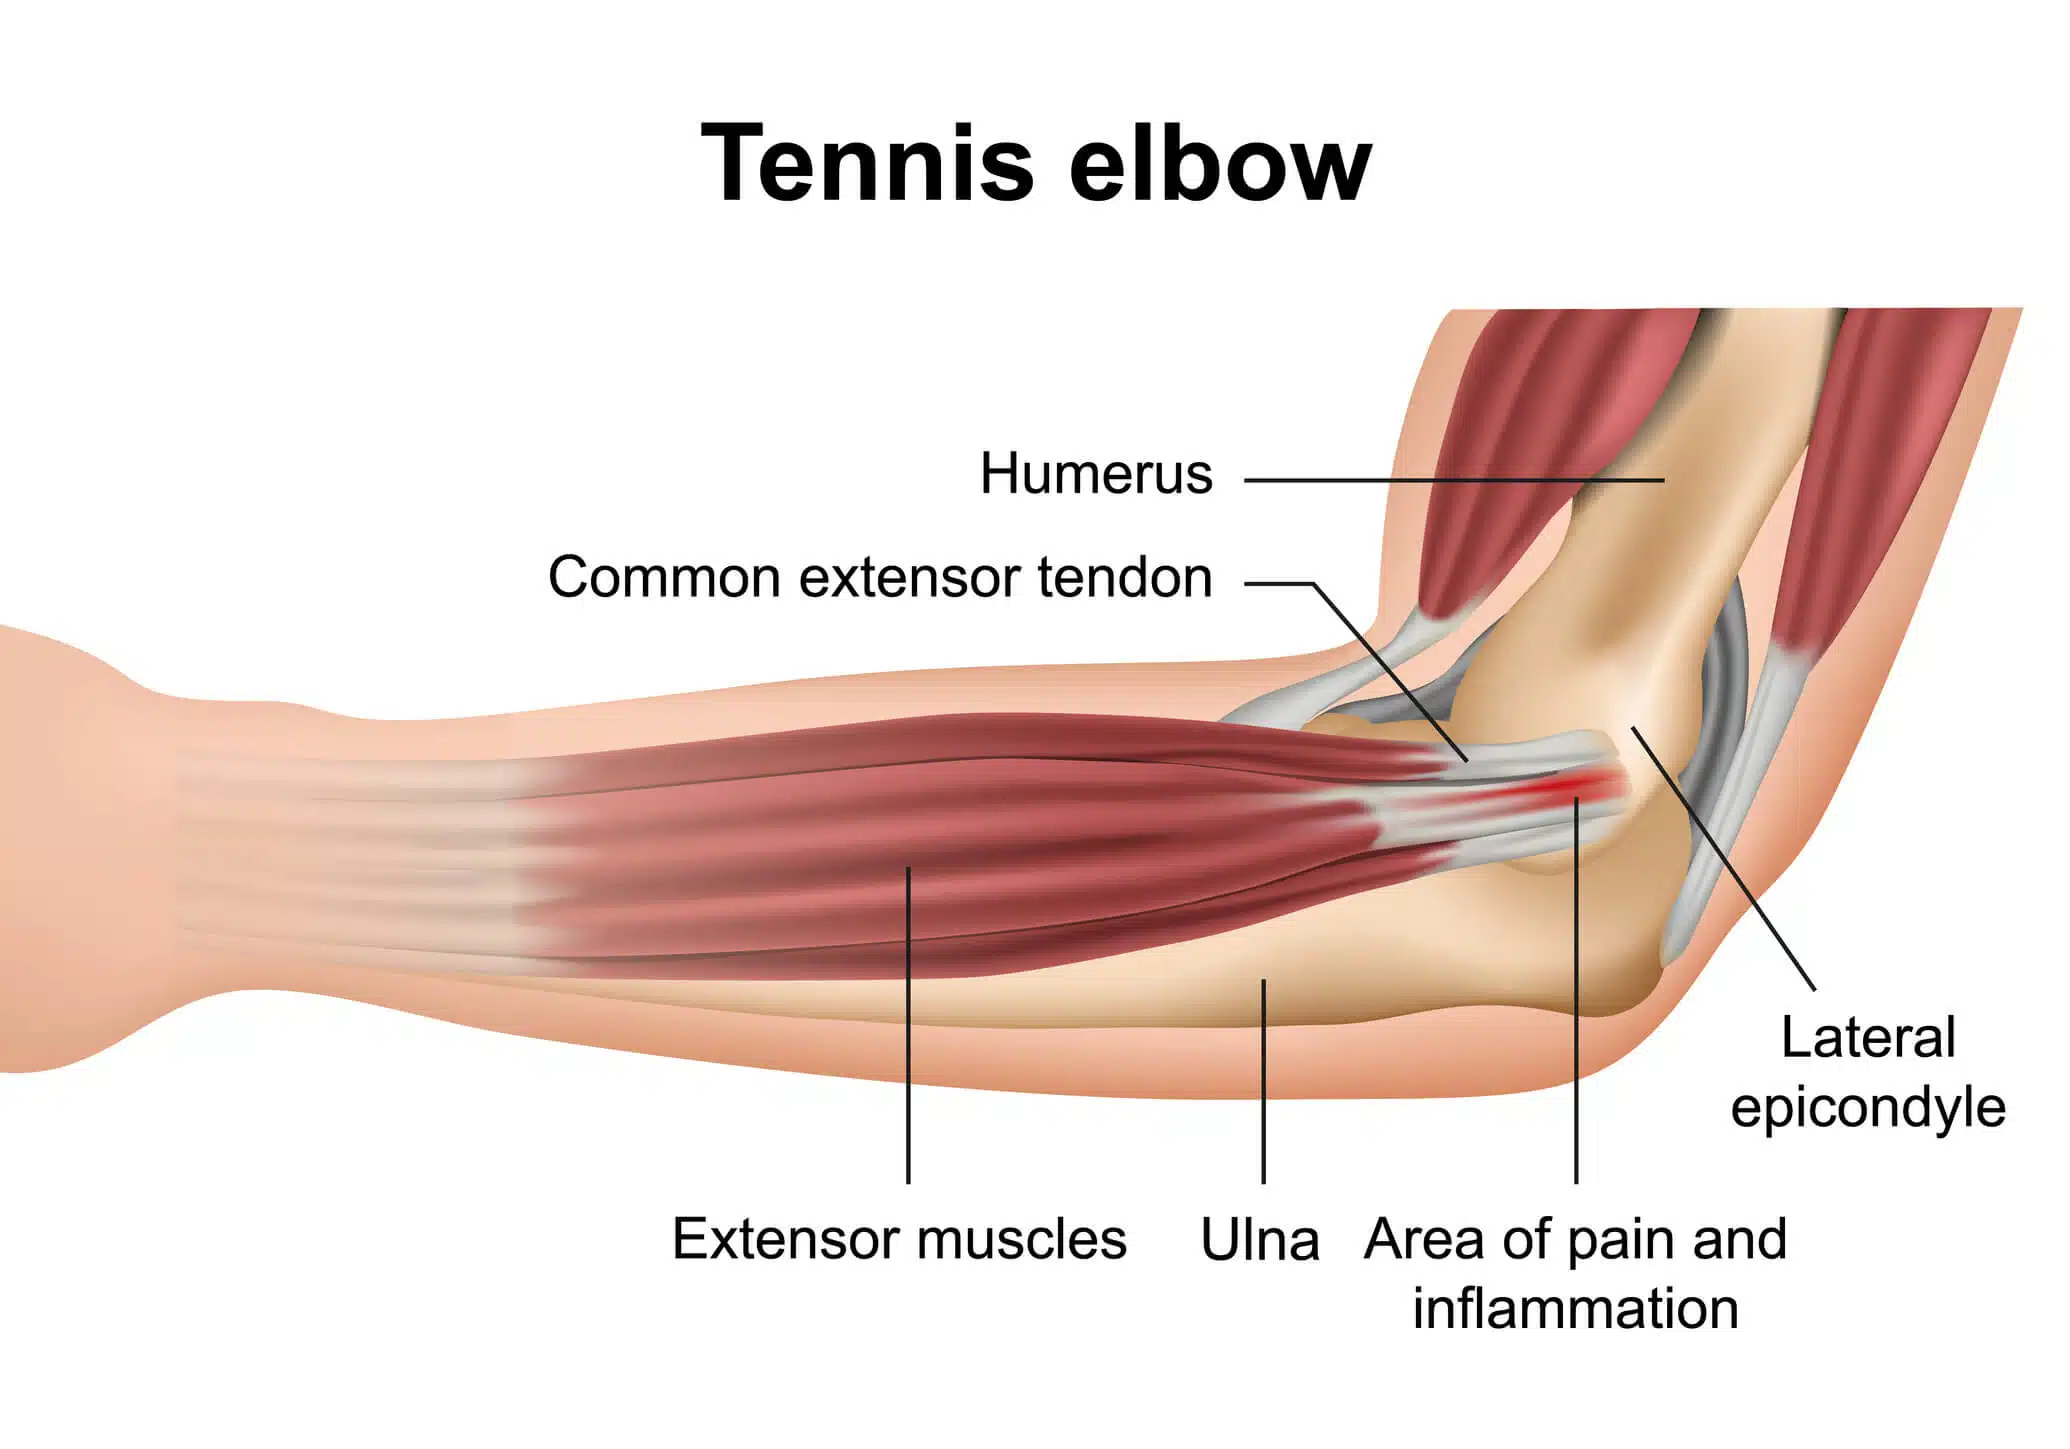 Band It Elbow Brace For Tennis Elbow Pain